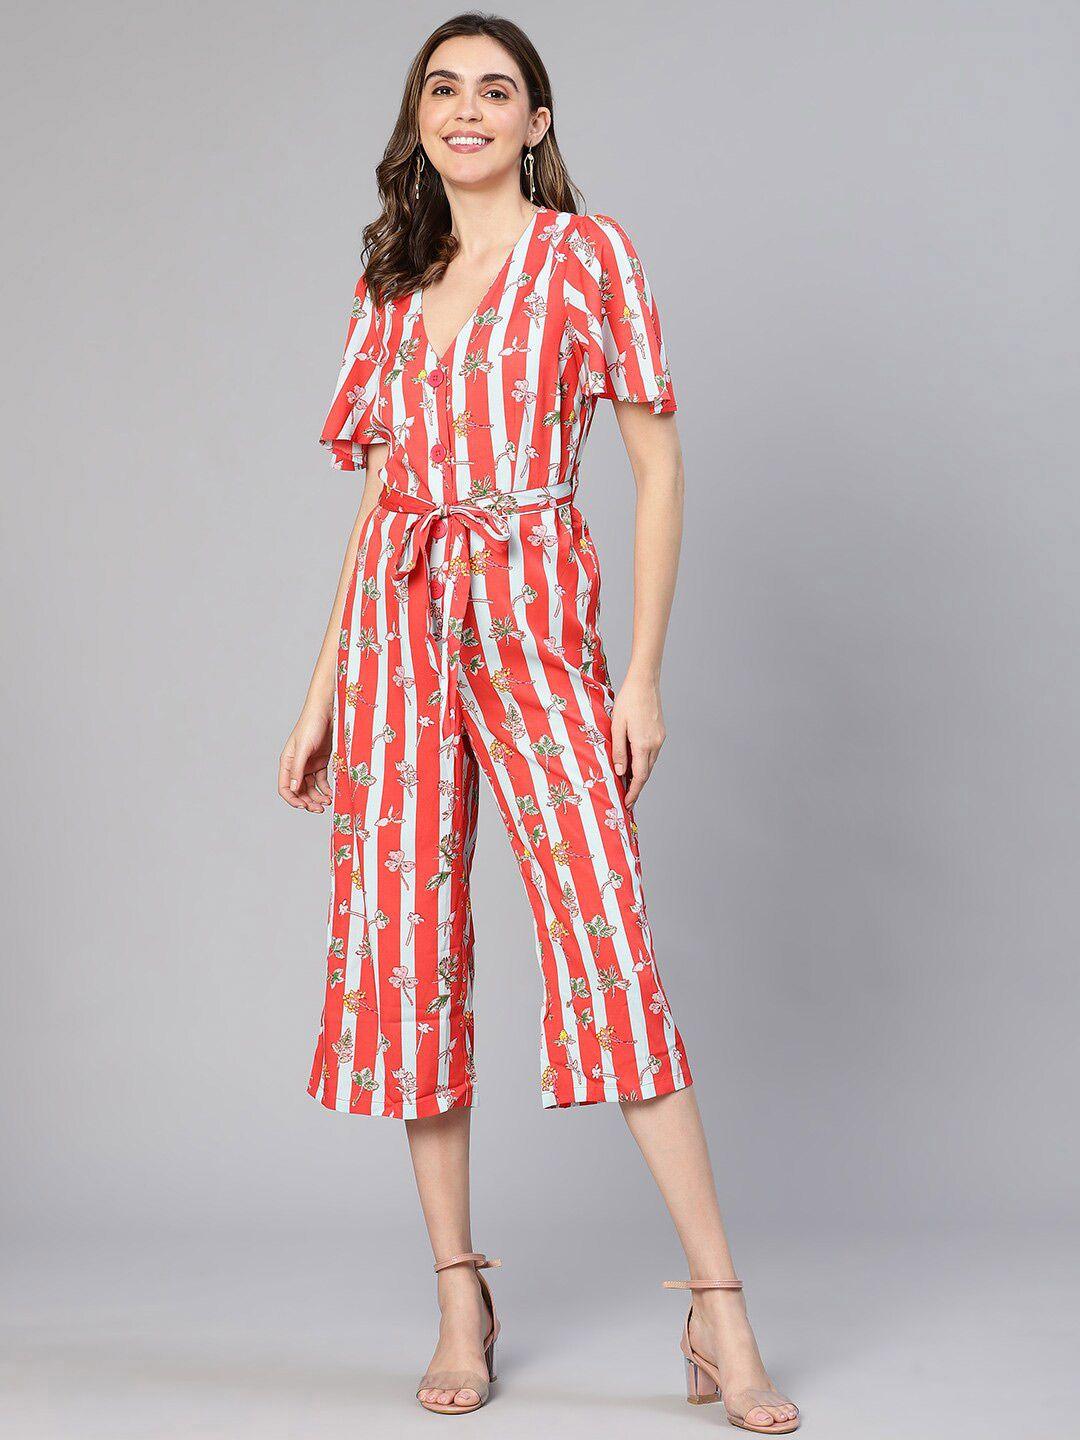 oxolloxo floral printed & striped v-neck culottes jumpsuit